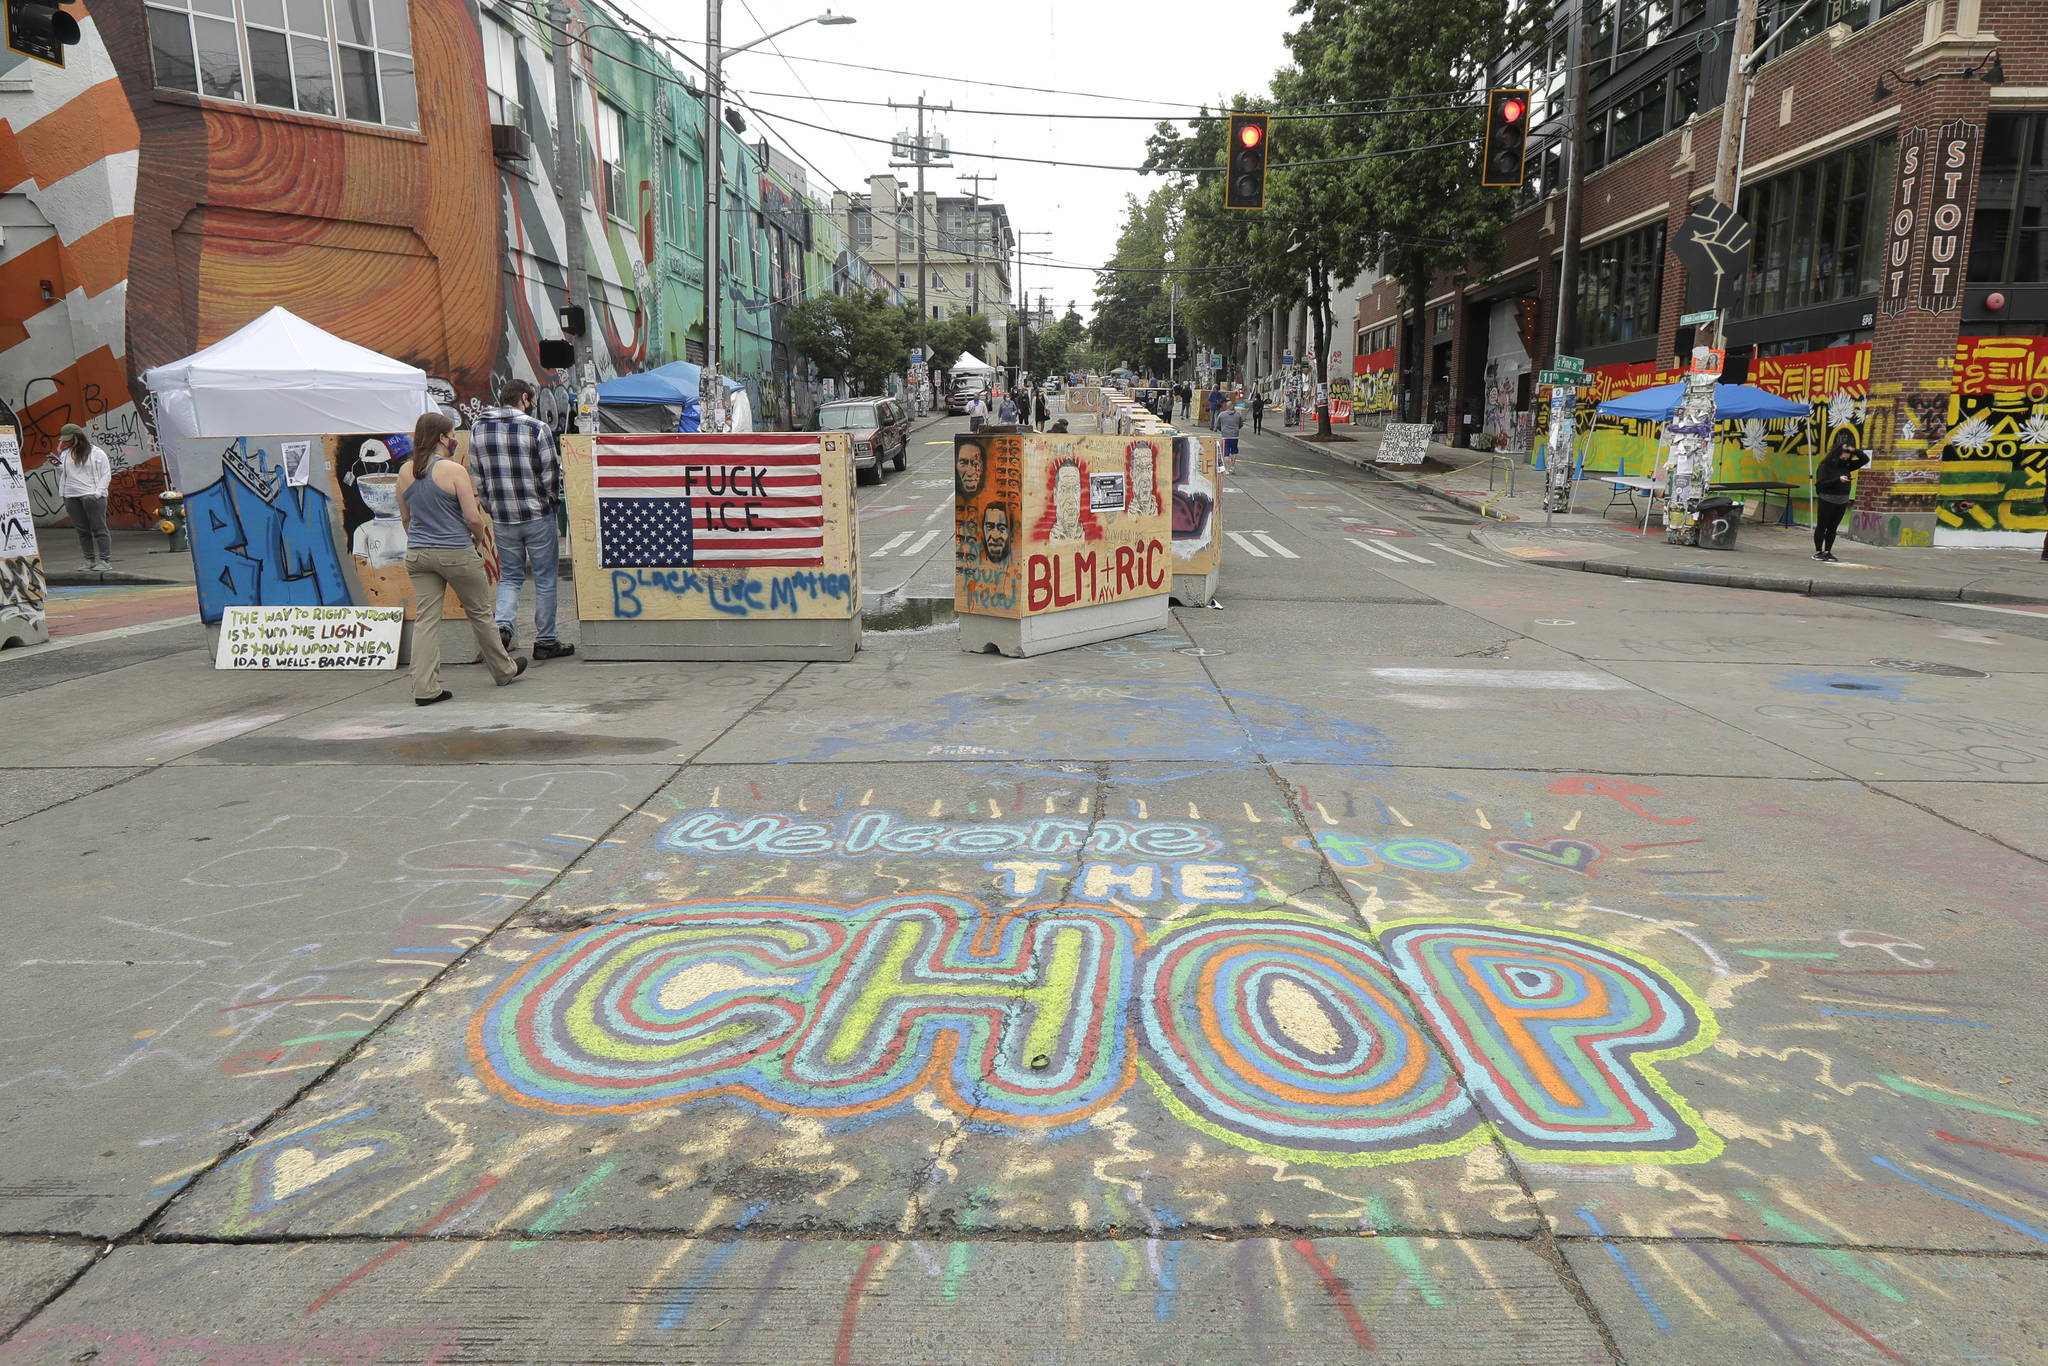 A sign on the street reads “Welcome to the CHOP,” Saturday, June 20, 2020, inside what has been named the Capitol Hill Occupied Protest zone in Seattle. A pre-dawn shooting near the area left one person dead and critically injured another person, authorities said Saturday. The area has been occupied by protesters after Seattle Police pulled back from several blocks of the city’s Capitol Hill neighborhood near the Police Department’s East Precinct building. (AP Photo/Ted S. Warren)